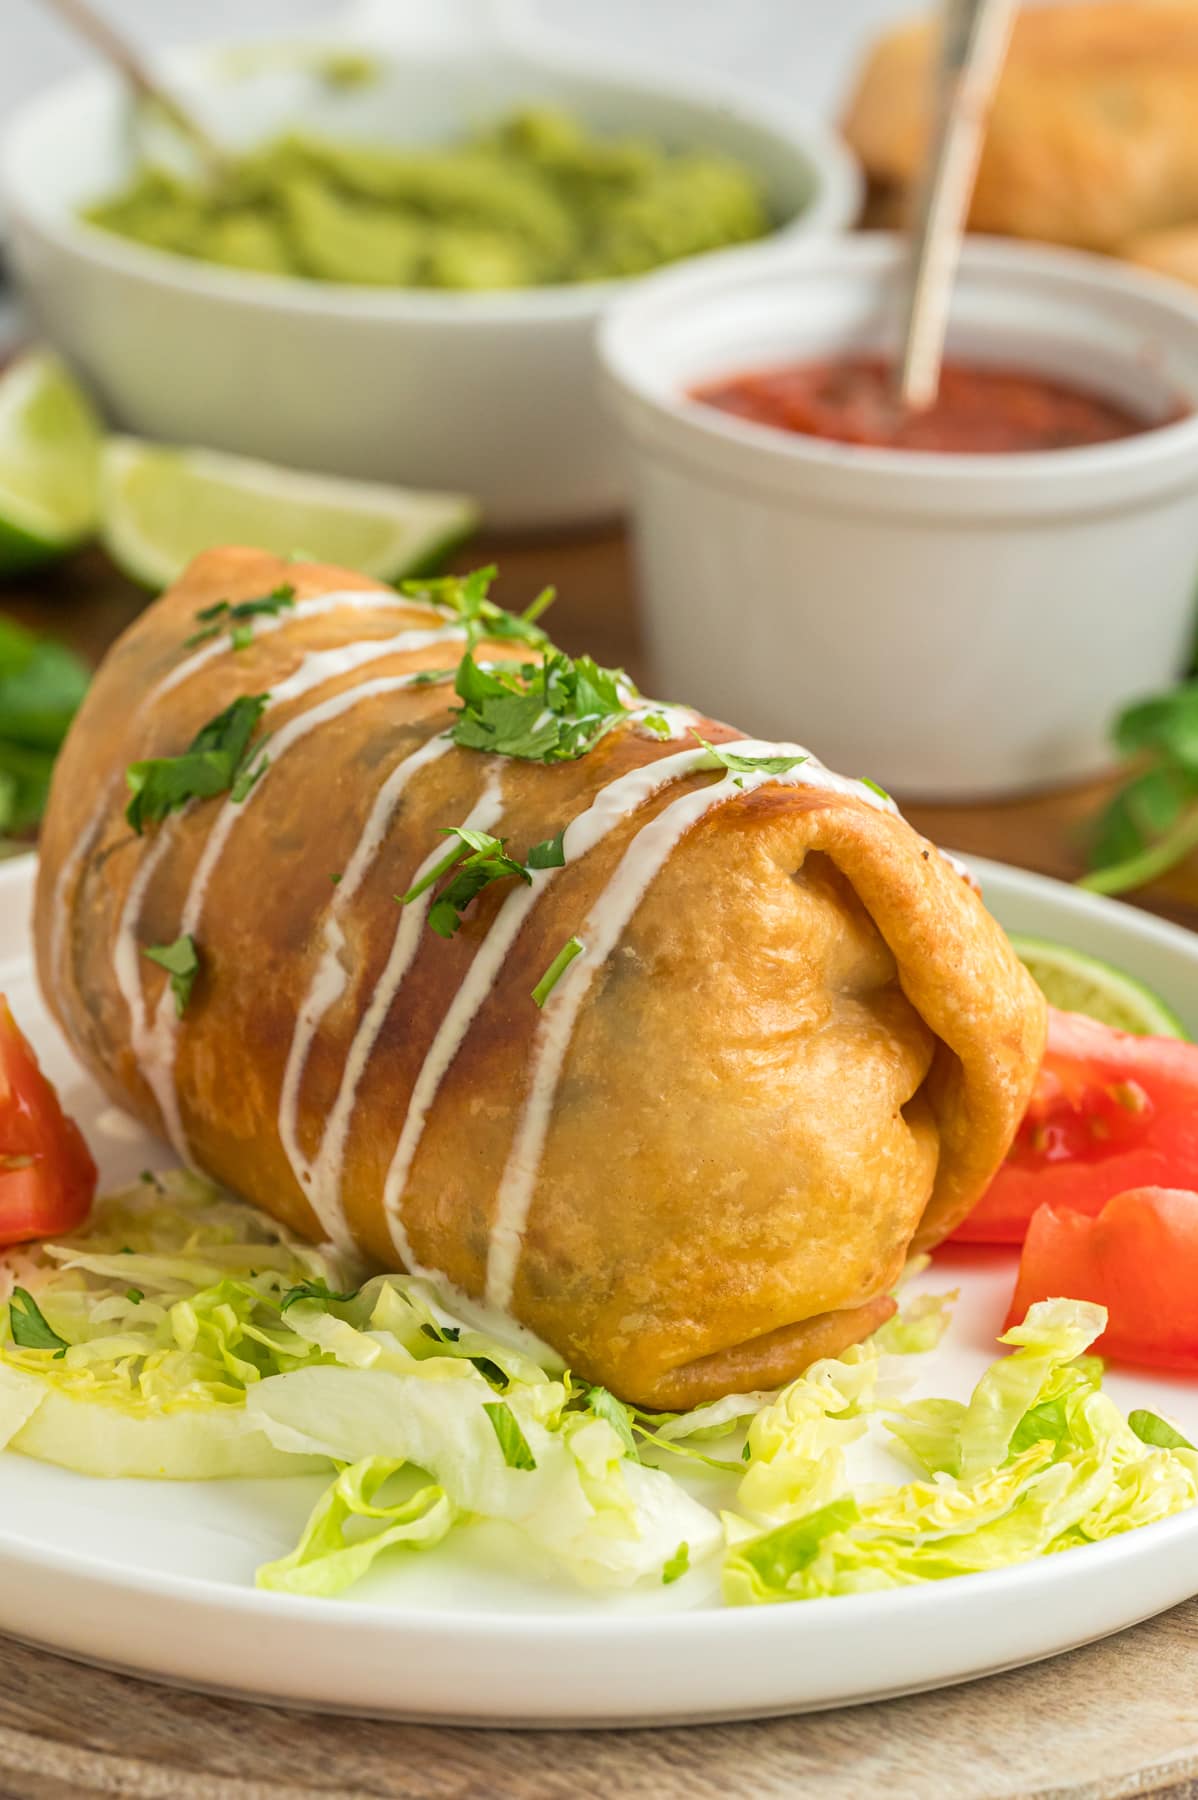 Chicken Chimichanga on plate with sour cream and salsa